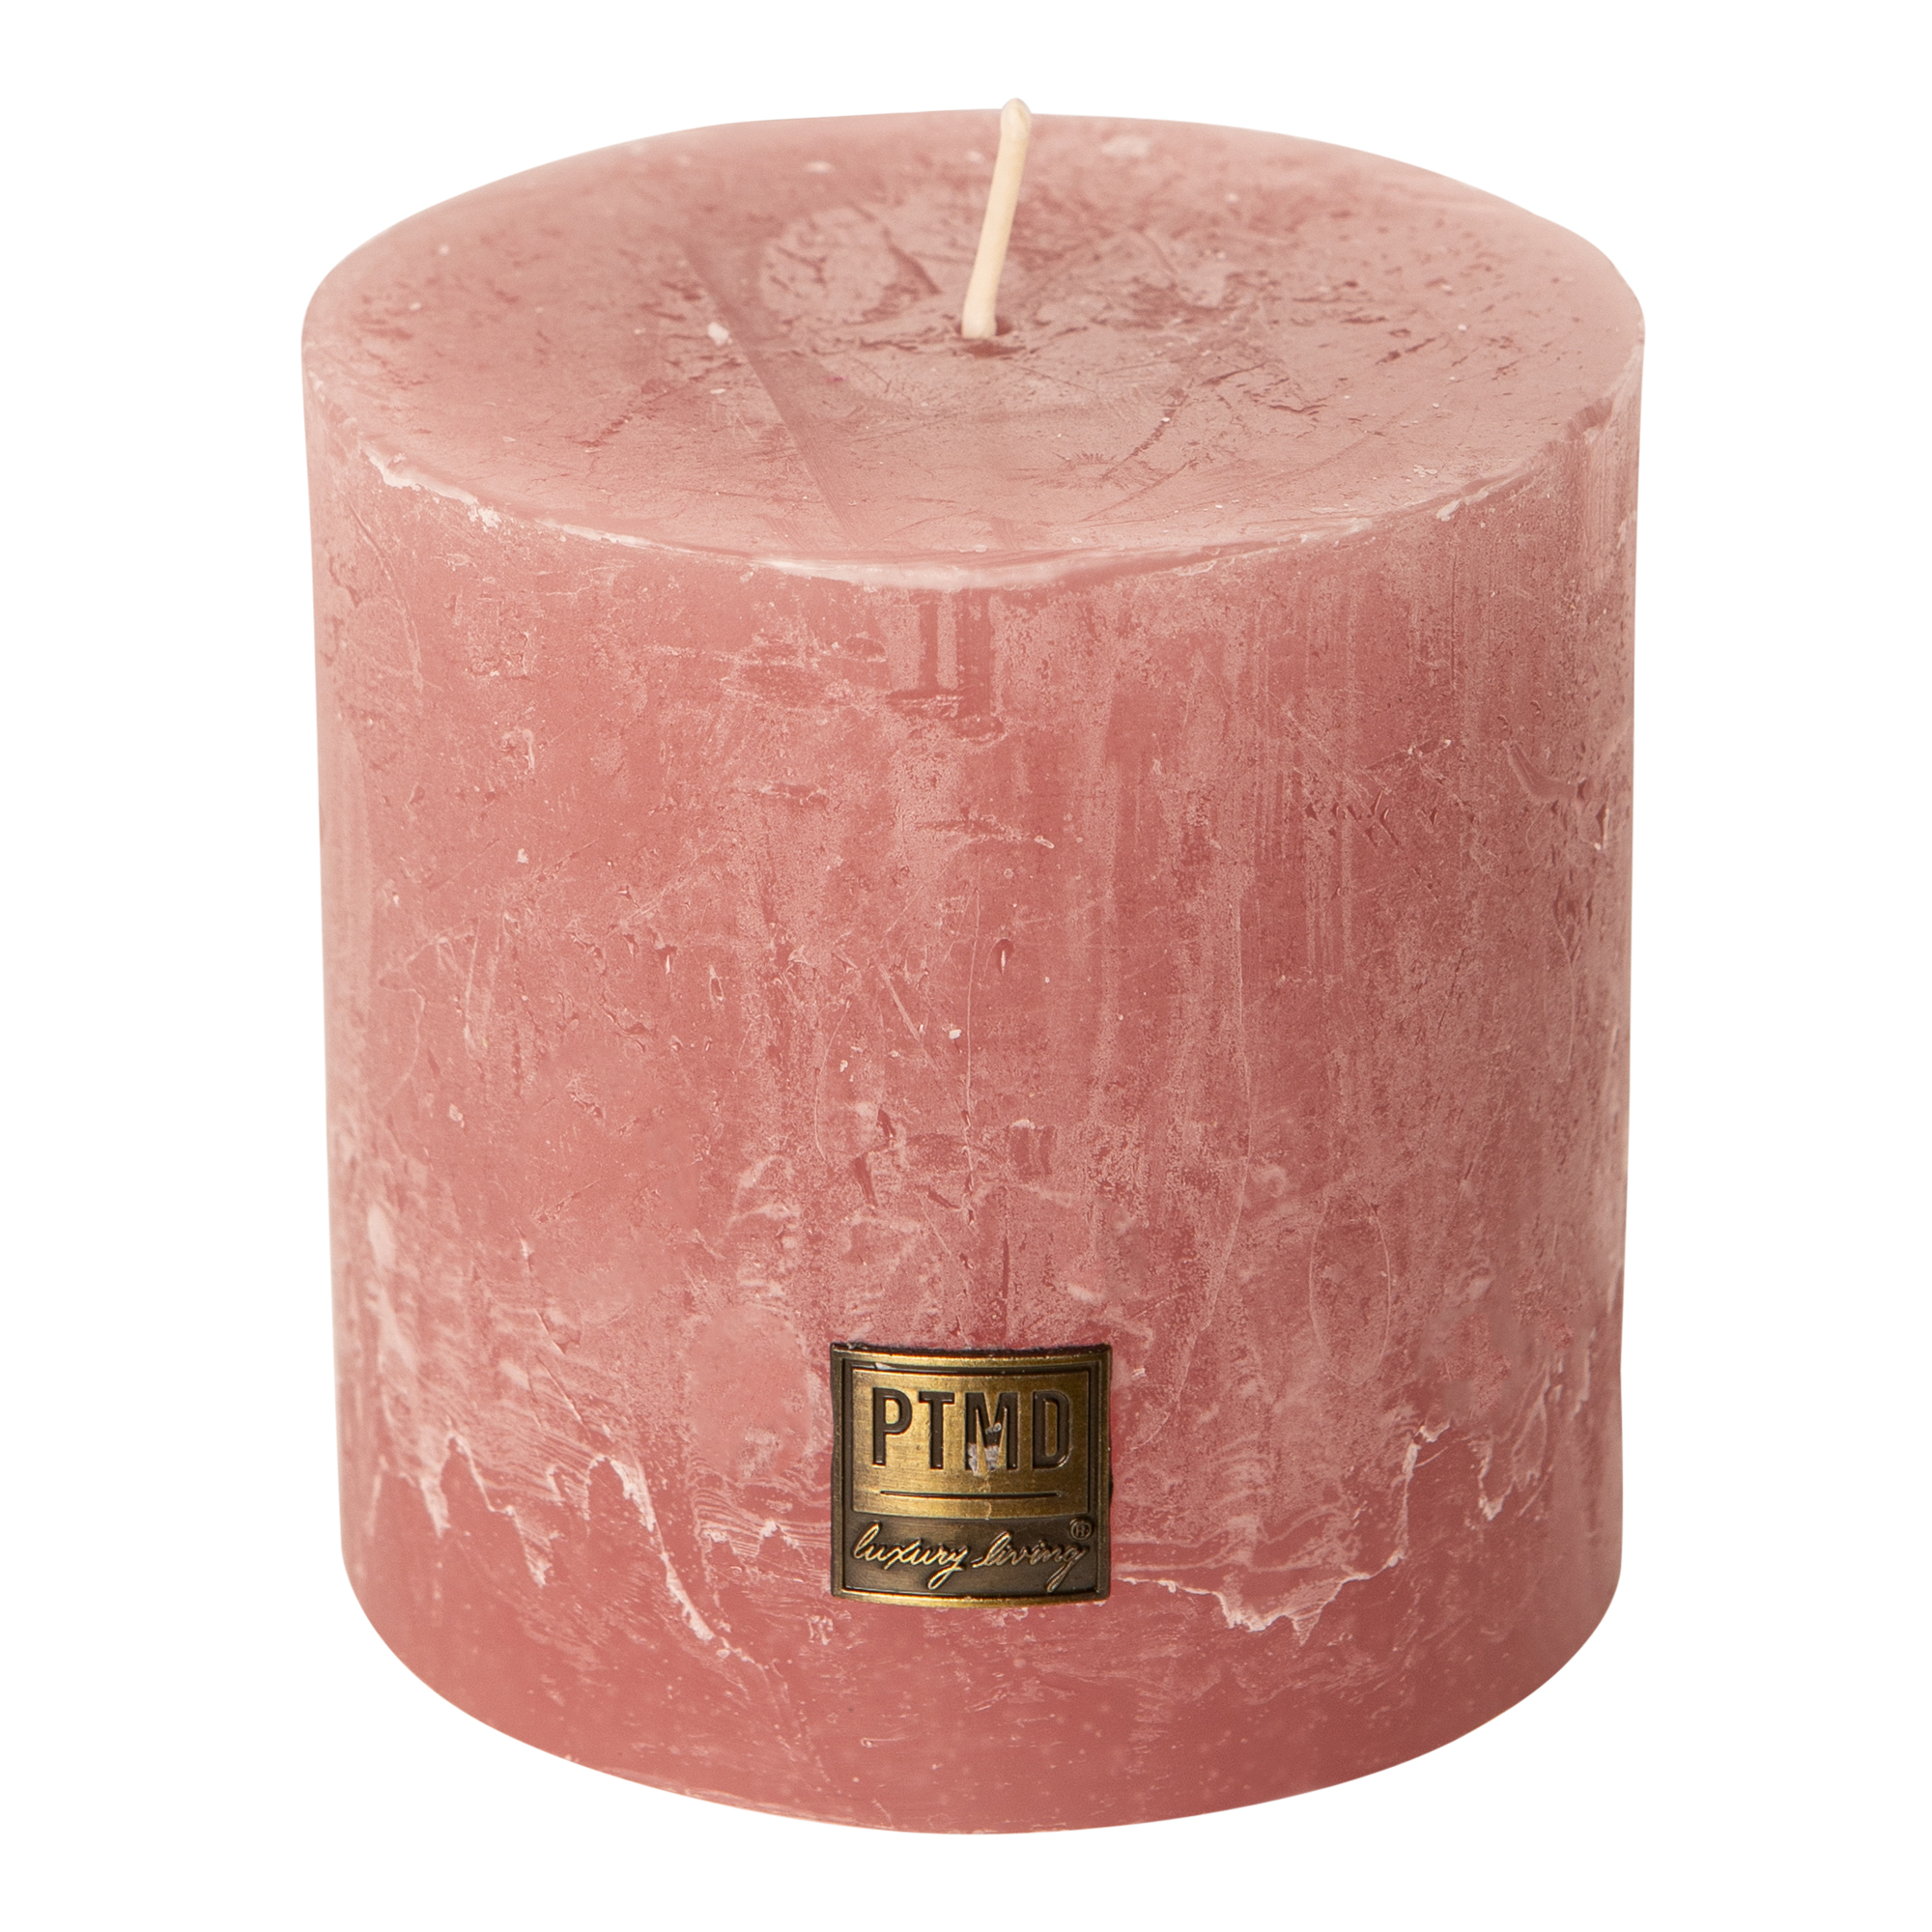 ptmd-10-x-10cm-blush-pink-rustic-block-candle